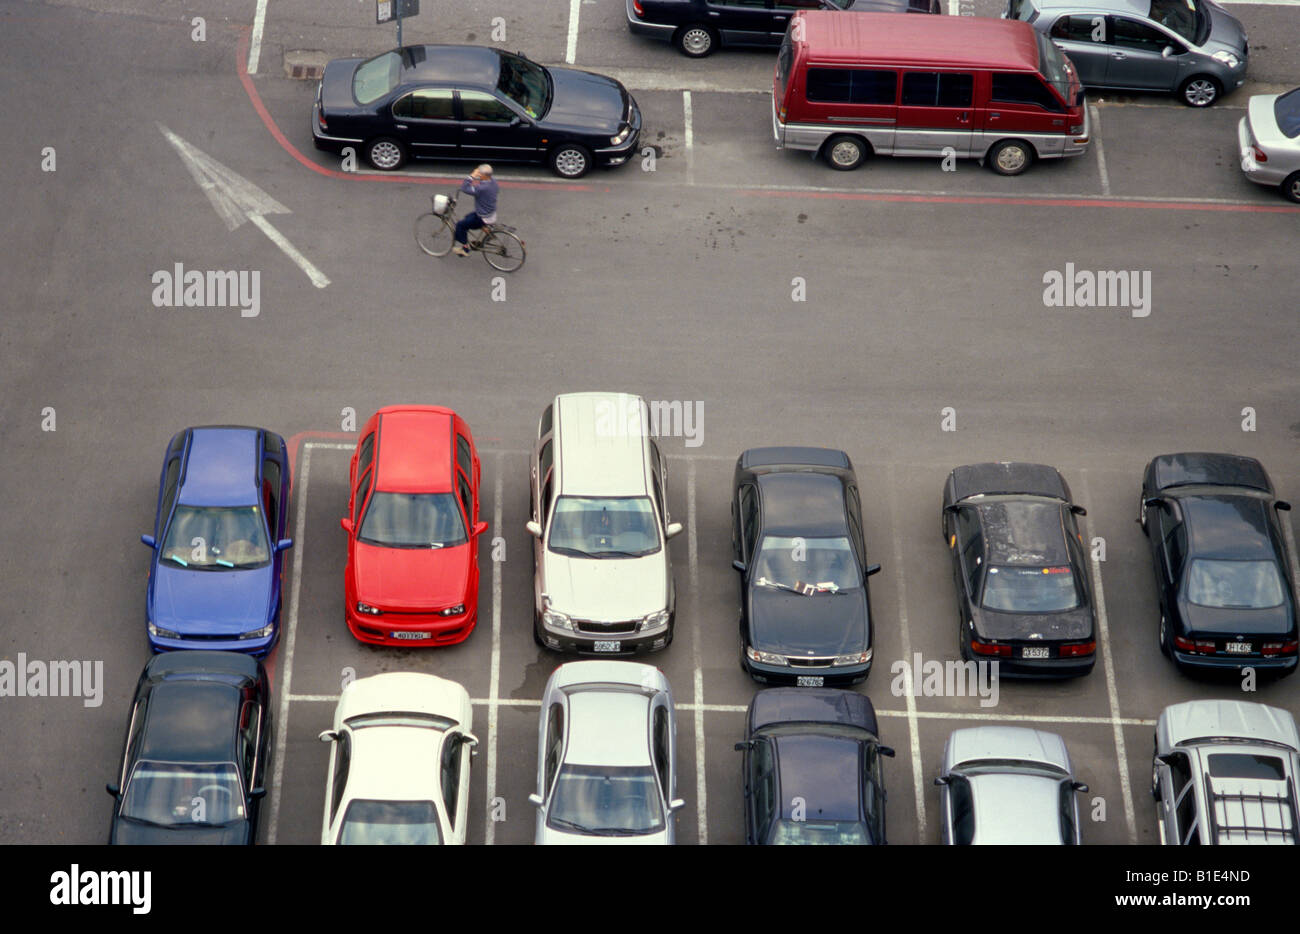 Man with hand on his head riding his bike out of a full parking lot. Stock Photo